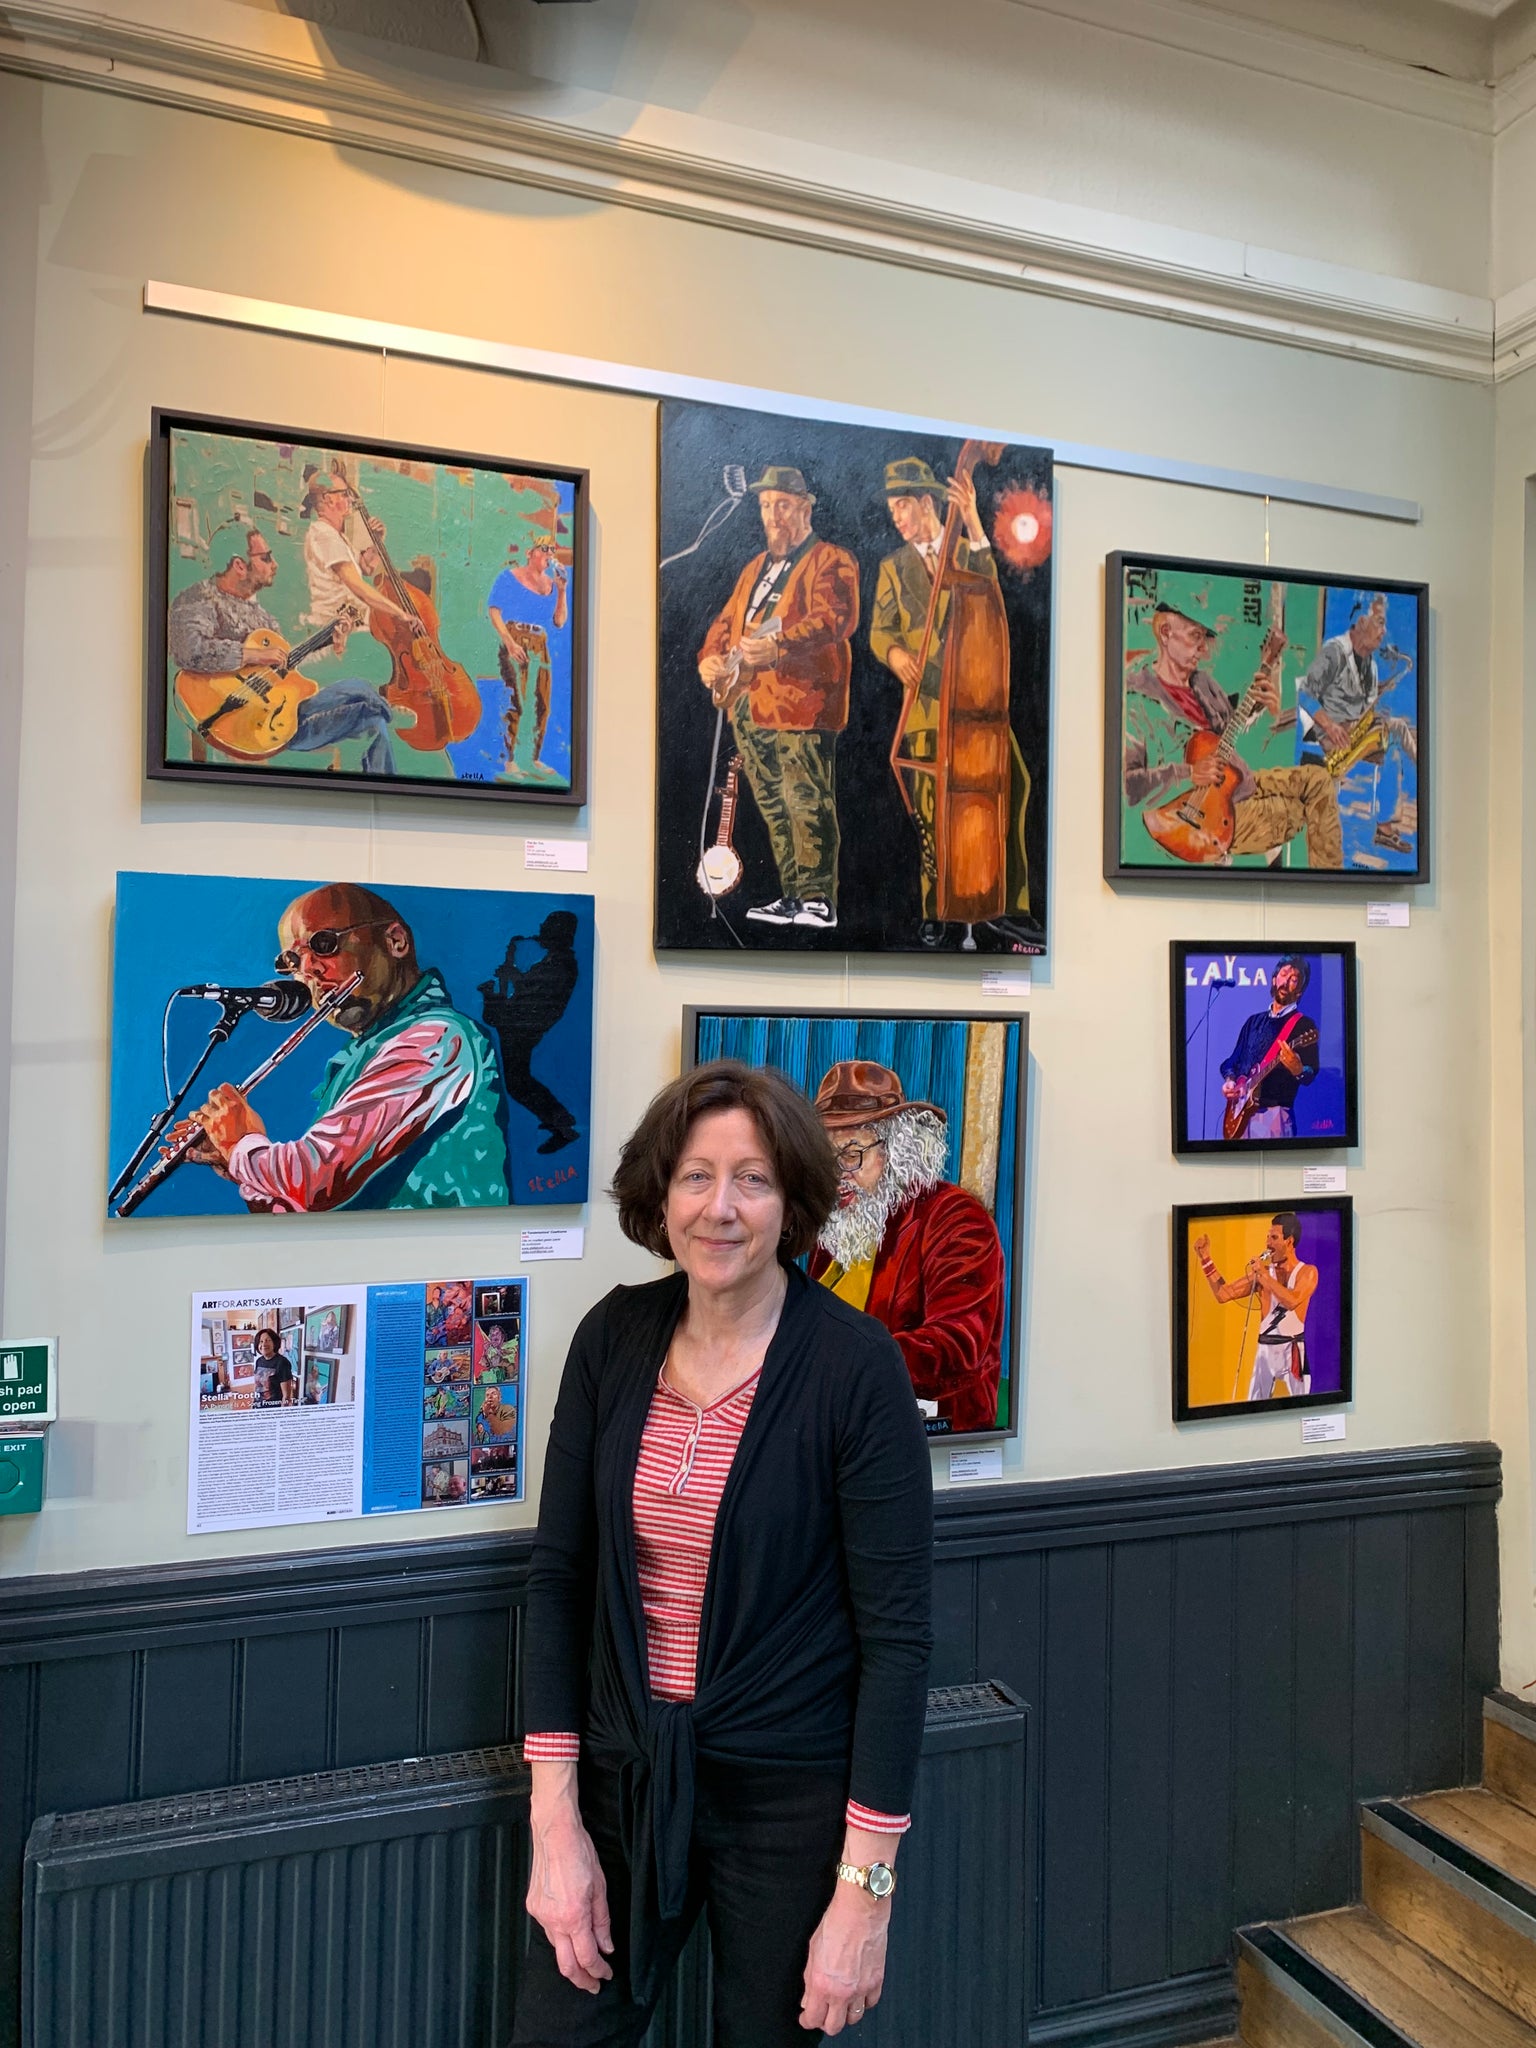 Stella Tooth with her jazz art exhibition at The Bull's Head Barnes